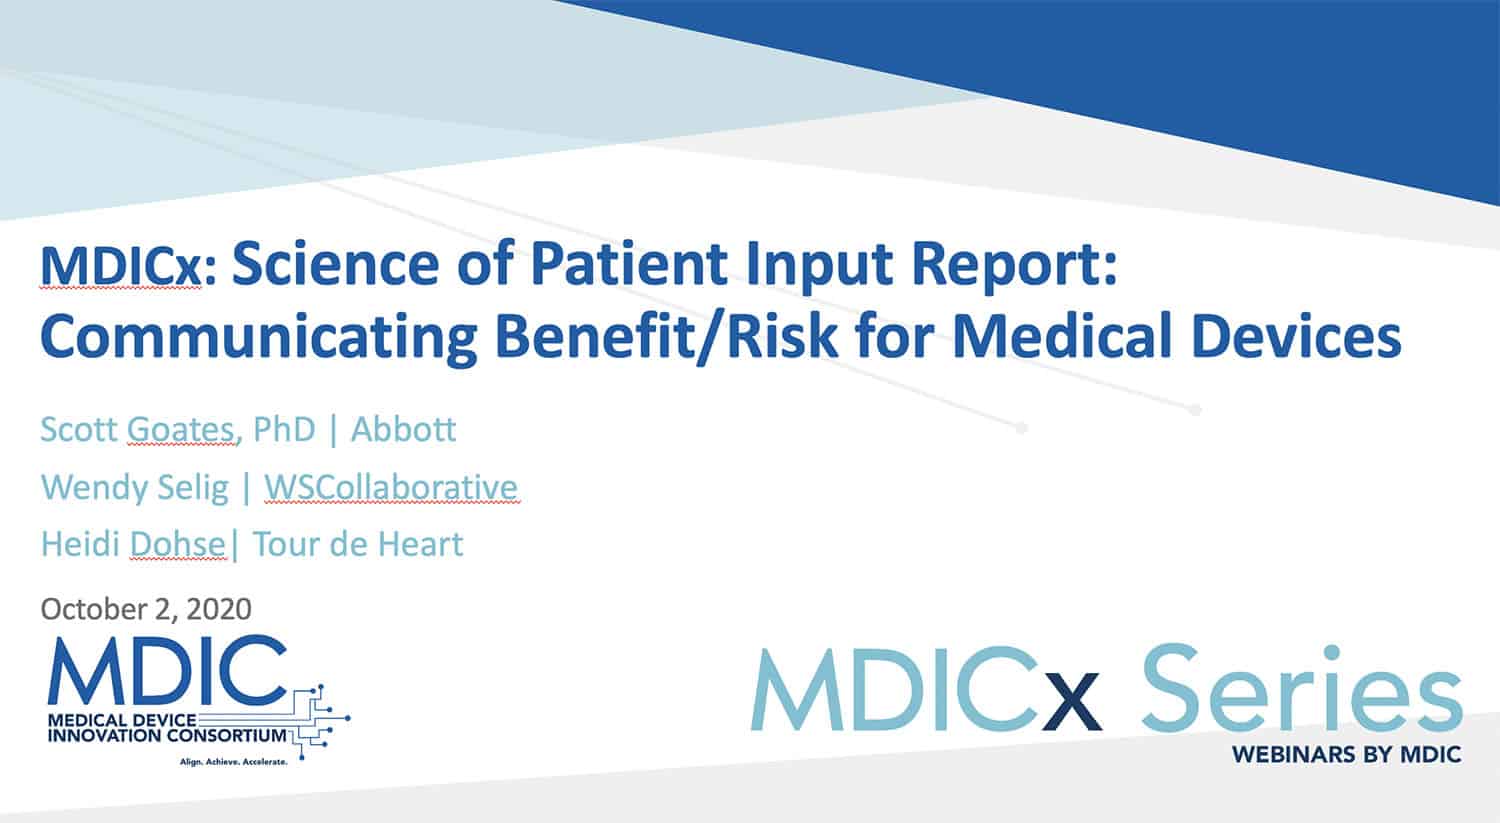 MDICx SPI: Science of Patient Input Report: Communicating Benefit/Risk for Medical Devices Presentation